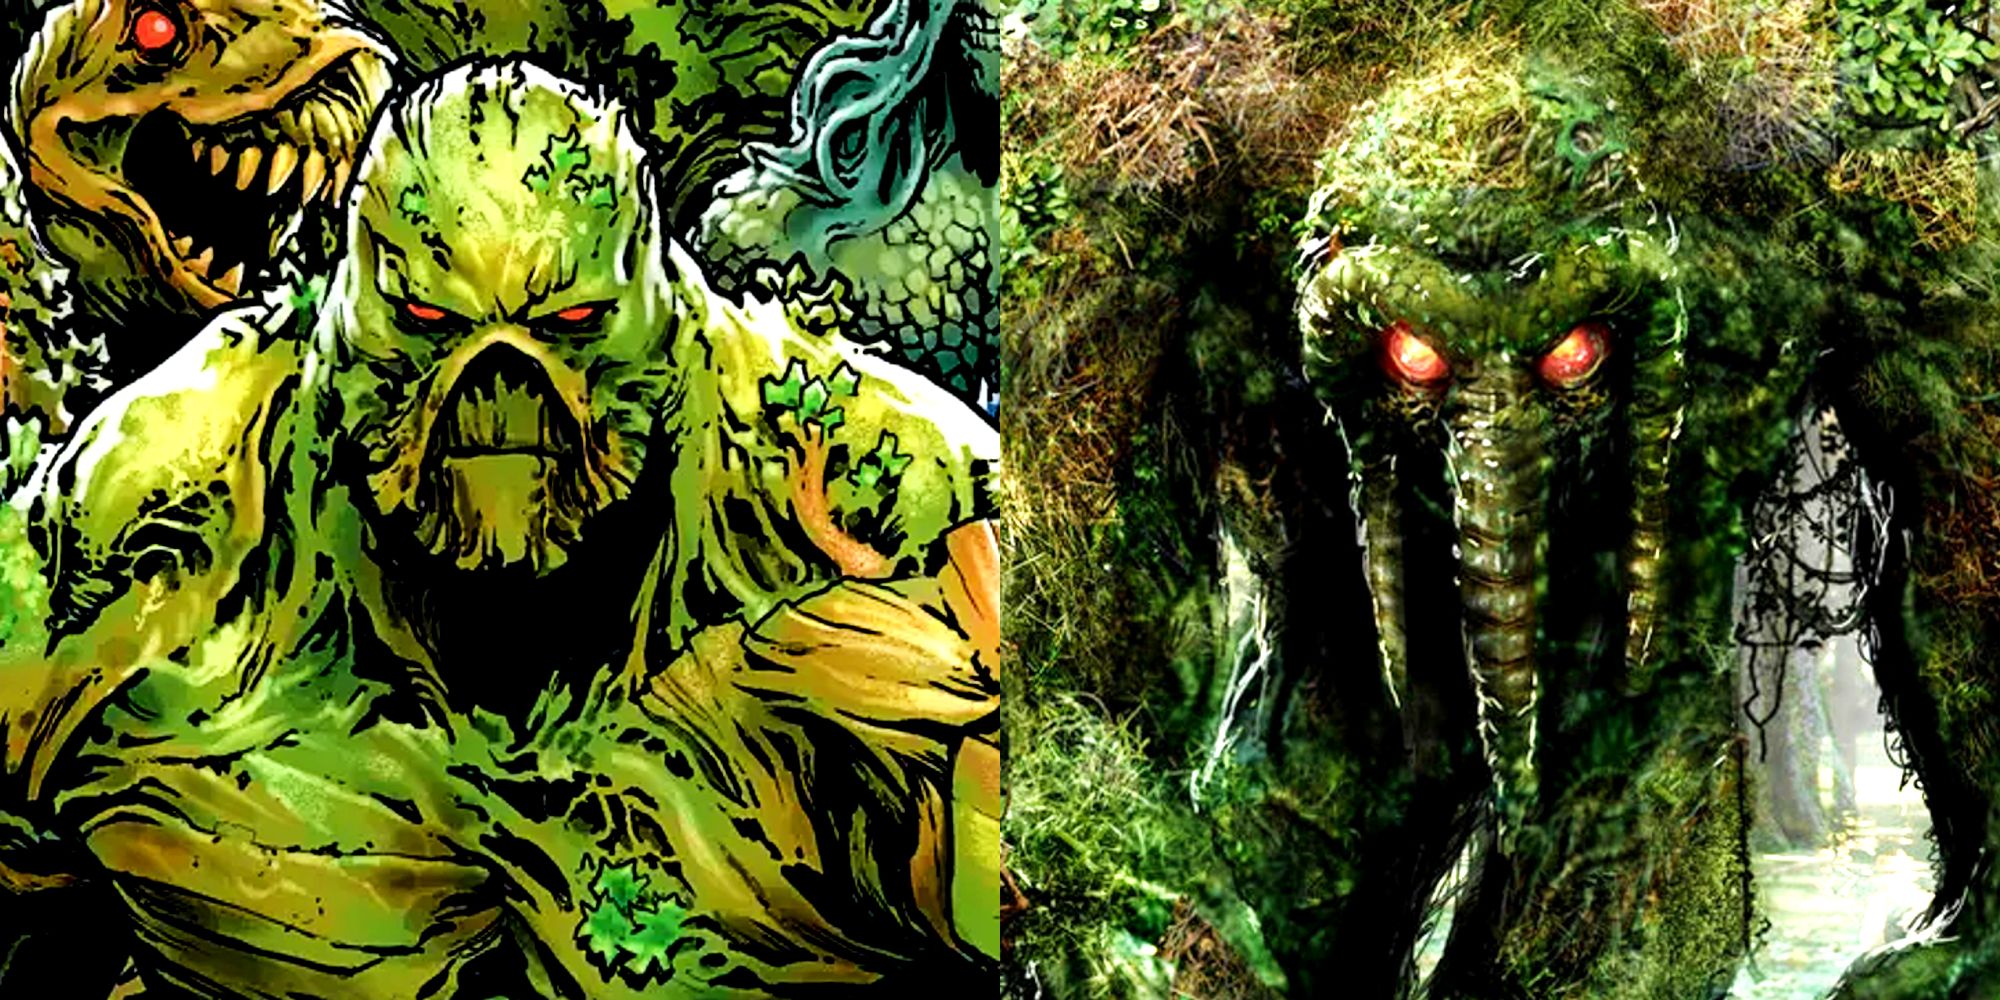 DC's Swamp Thing and Marvel's Man-Thing